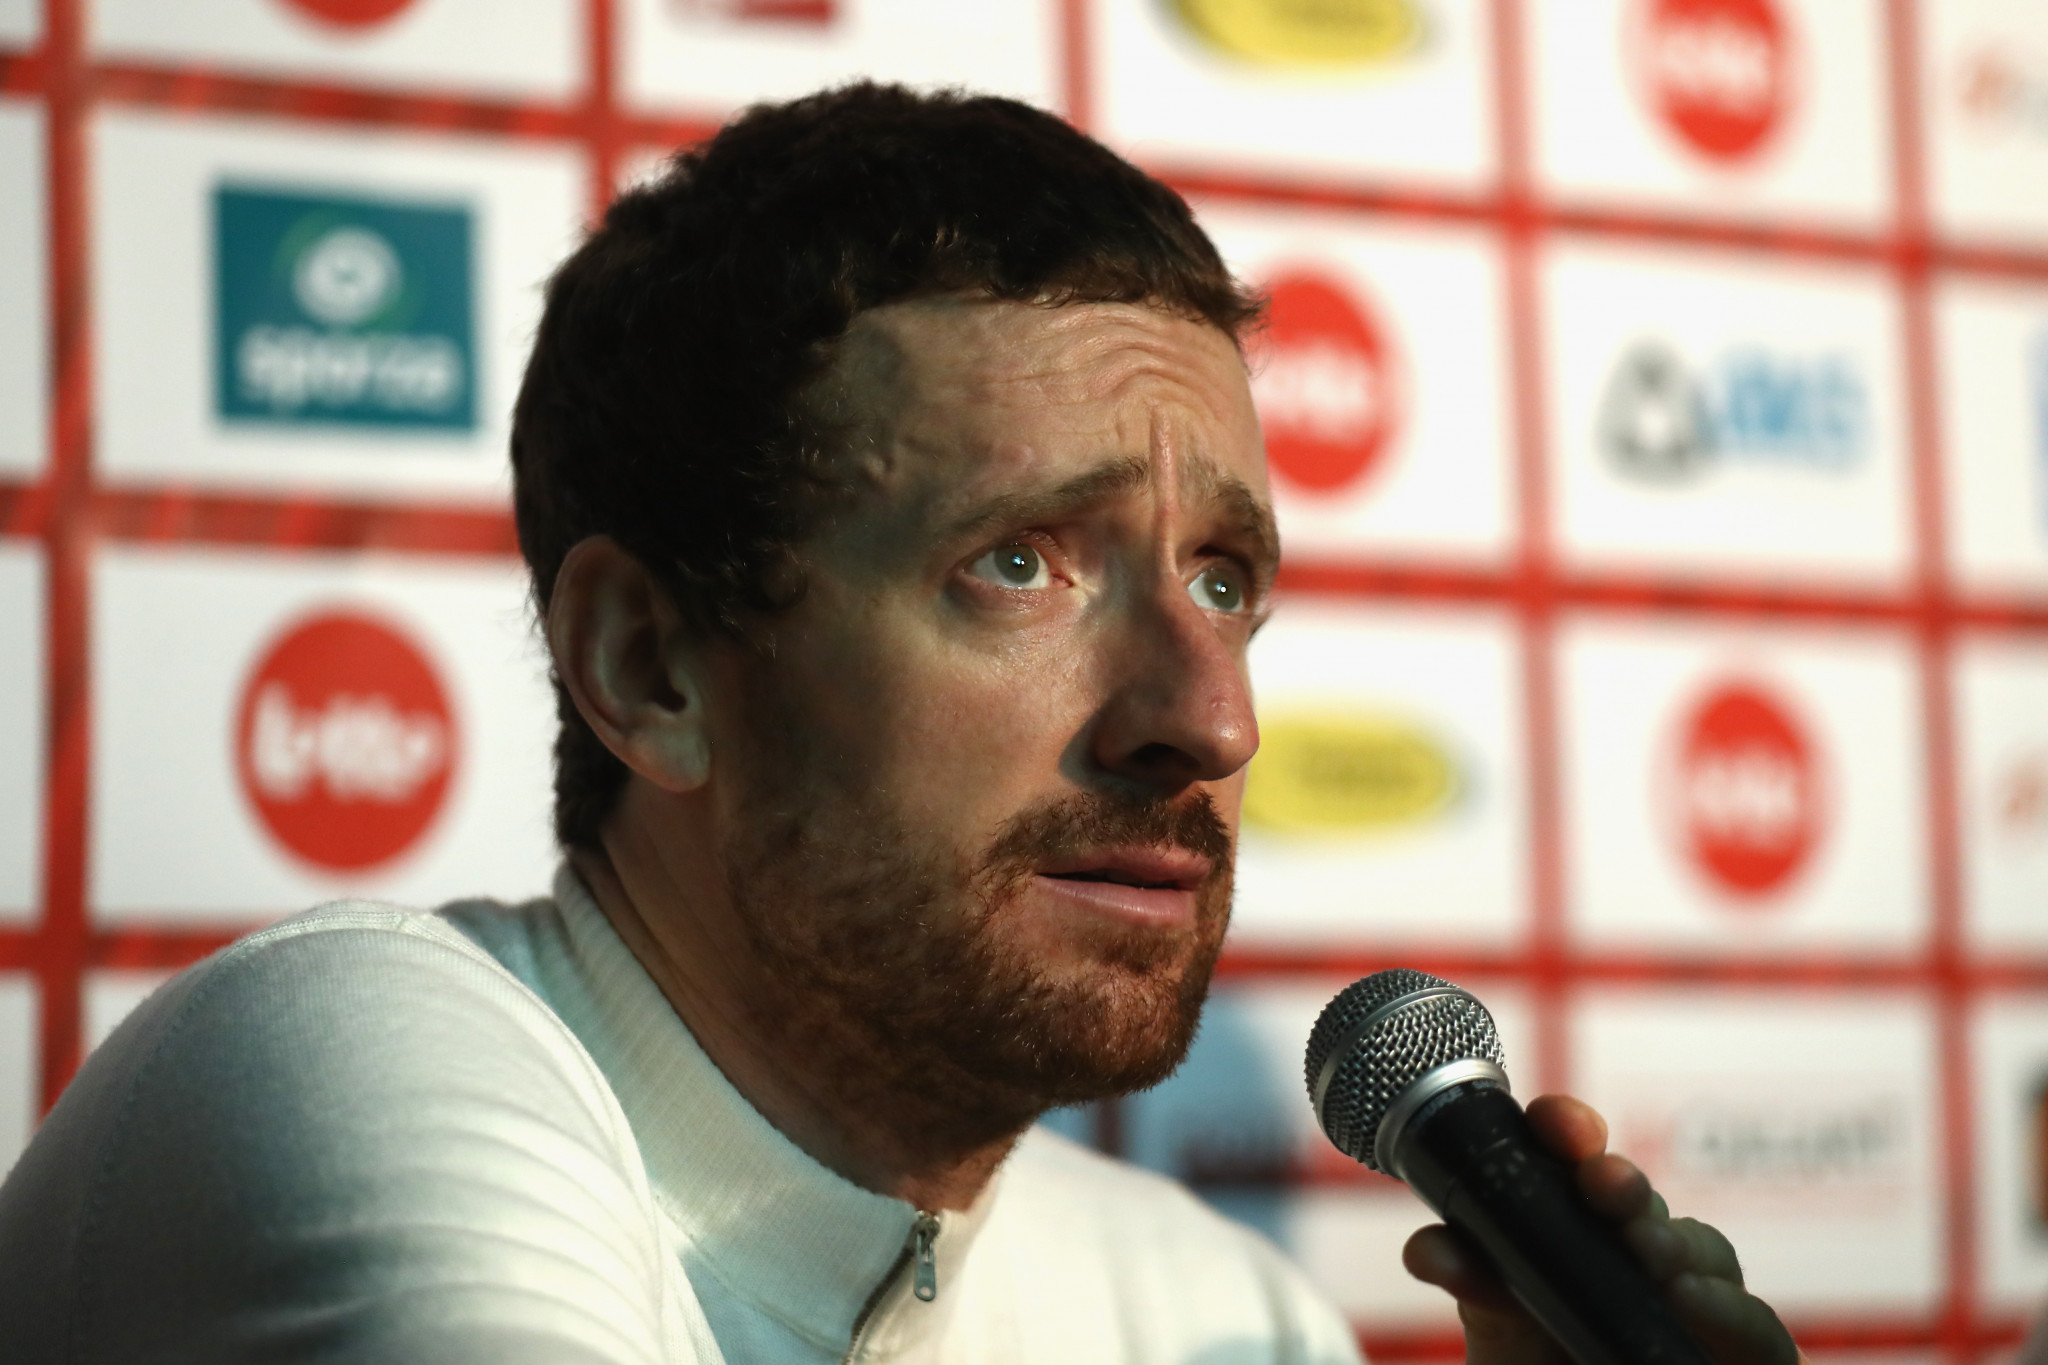 British cyclist Sir Bradley Wiggins is among the athletes to have been targeted by the Russian hacking group ©Getty Images